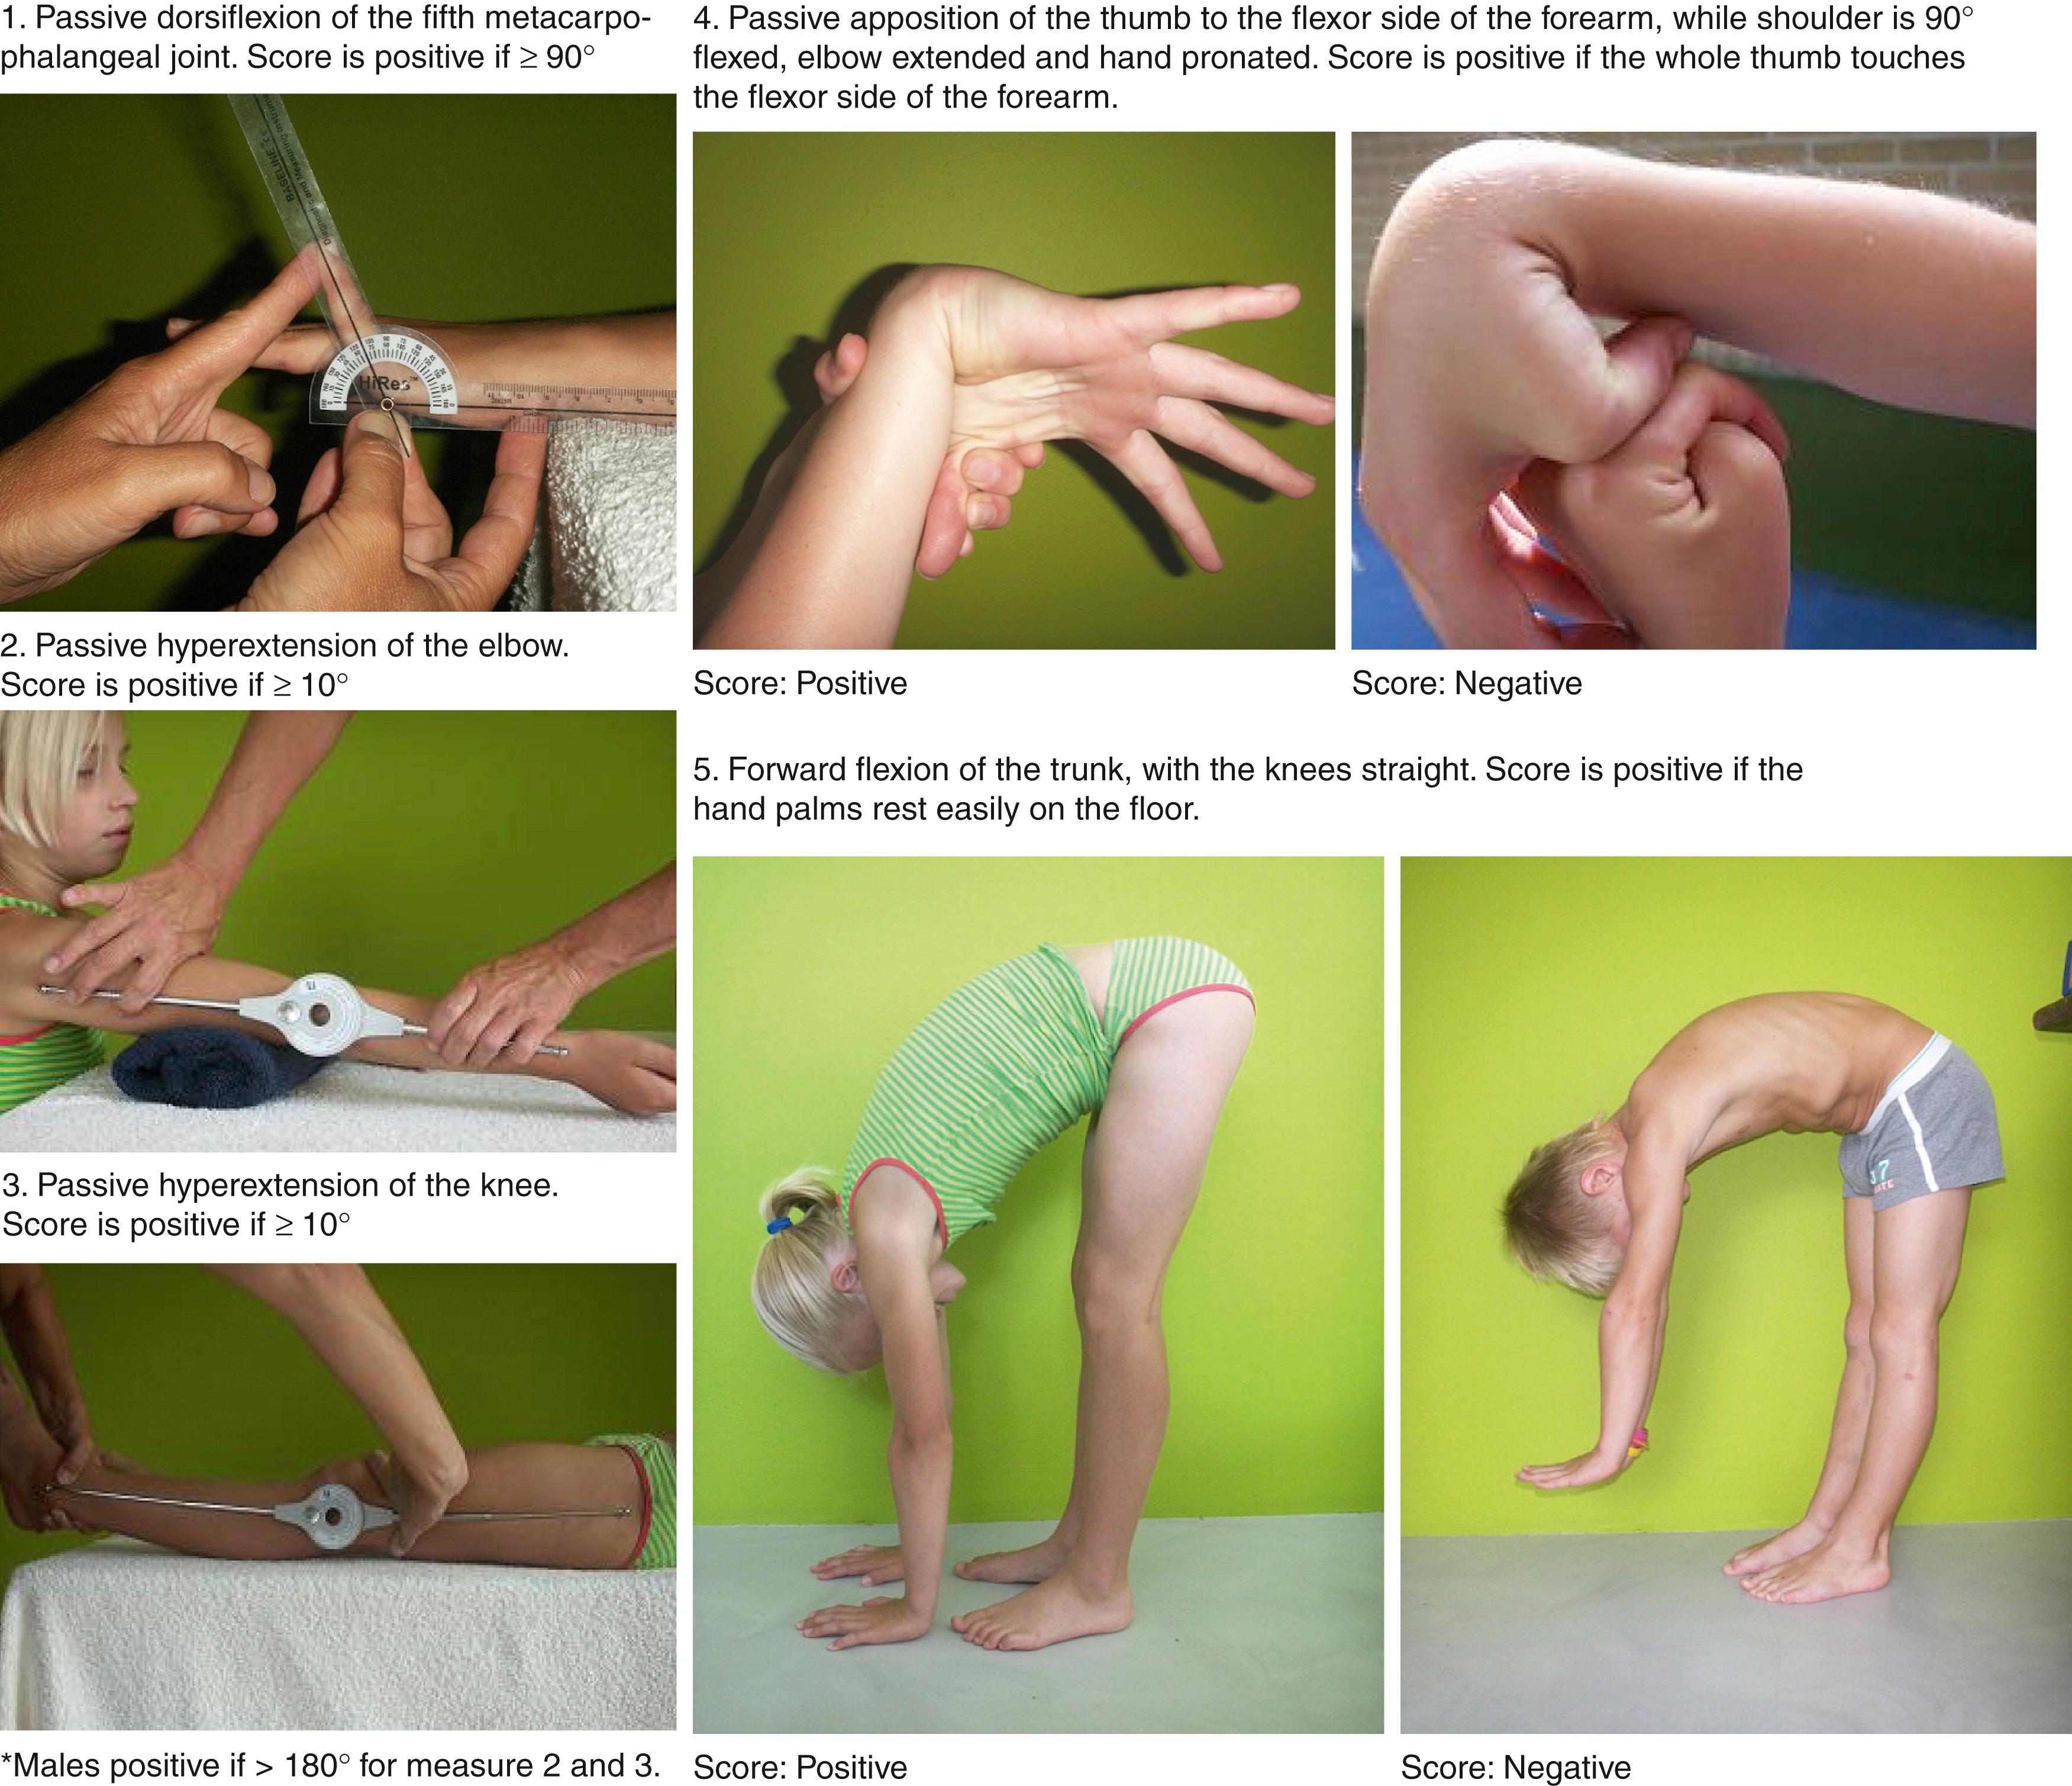 Fig. 47.2, Beighton score. The range of motion of several key small and large joints is measured to provide an overview of joint hypermobility. Instability is not assessed. Scoring: 2 points for each bilateral measure in nos. 1 to 4 and 1 point for no. 5 , equaling a total possible score of 9. Hypermobility is considered significant with a score of ≥6 between the ages of 6 and 35.